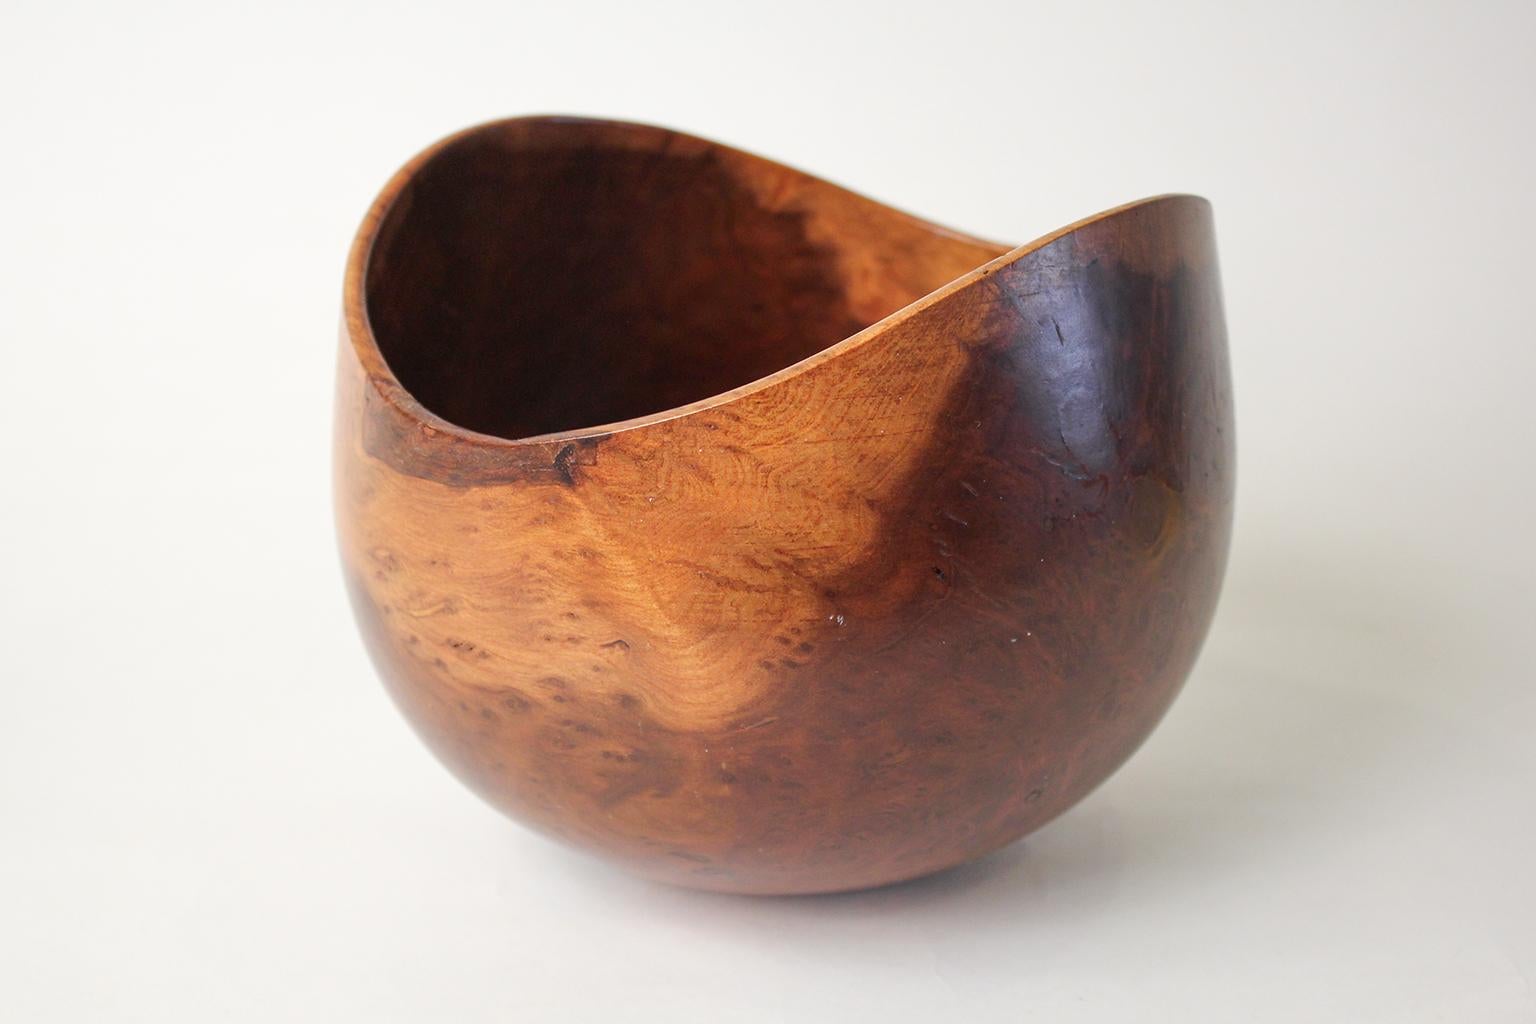 Excellent carved bowl by California design artist, Bob Stocksdale. Dates from 1987 and is signed on the bottom. Made from California redwood burl wood. Great design and form. In excellent shape. Measures 6 1/4